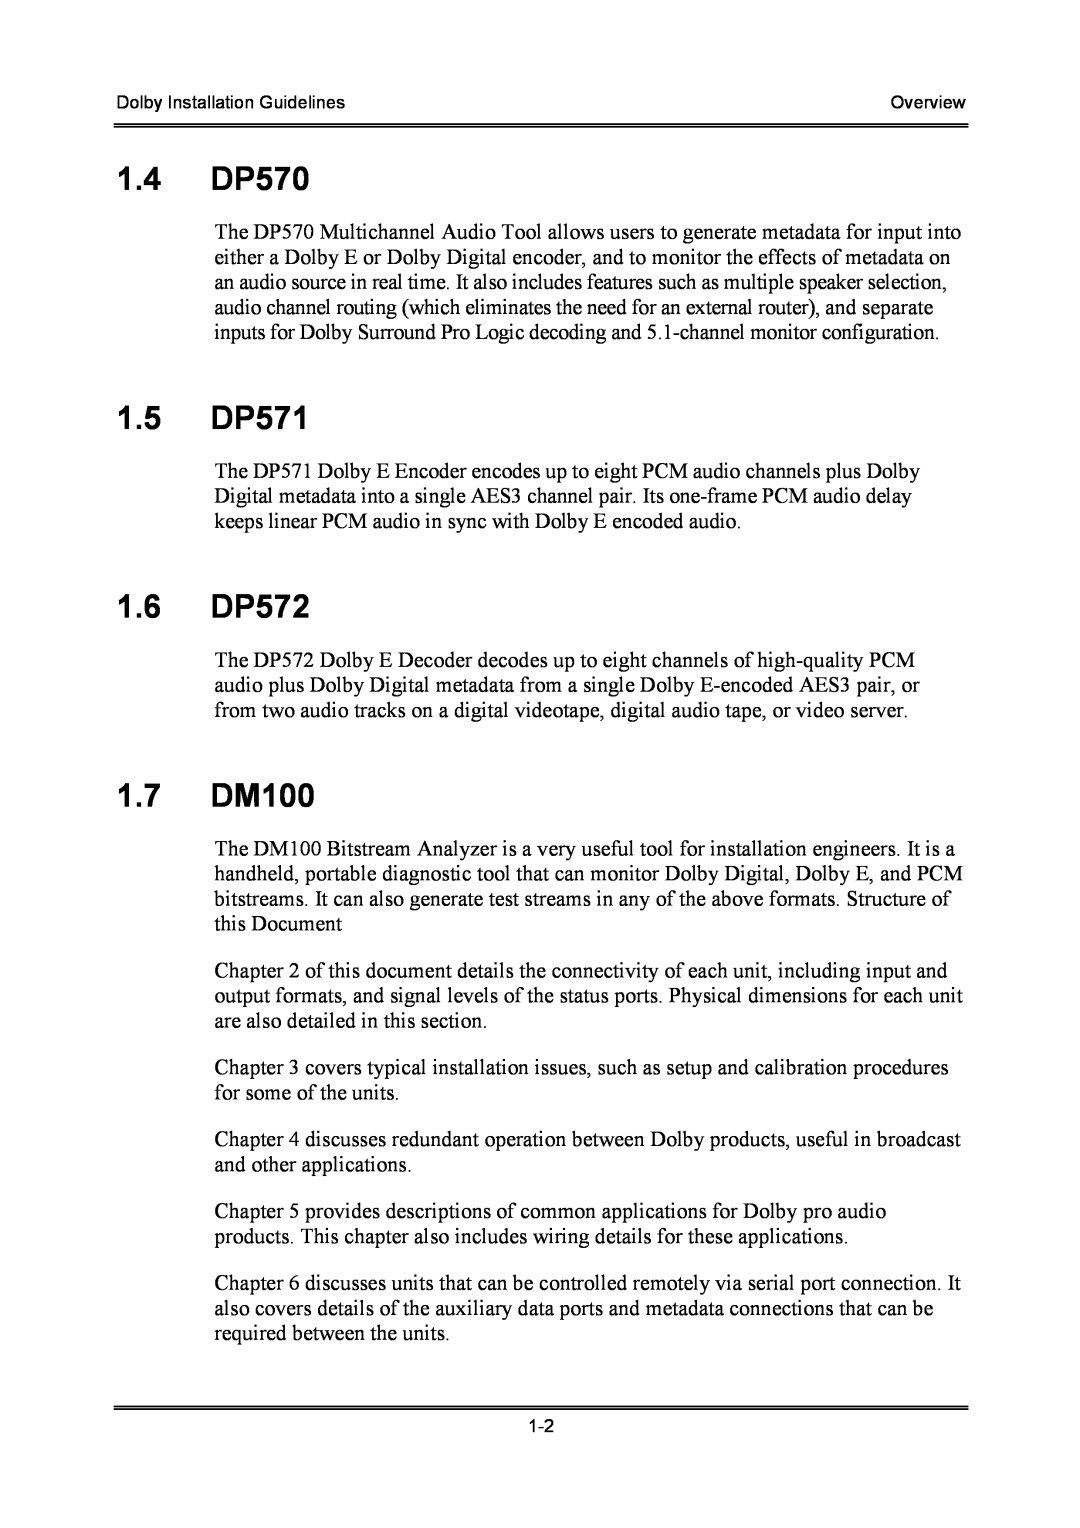 Dolby Laboratories S01/13621 manual 1.4DP570, 1.5DP571, 1.6DP572, 1.7DM100, Dolby Installation Guidelines, Overview 